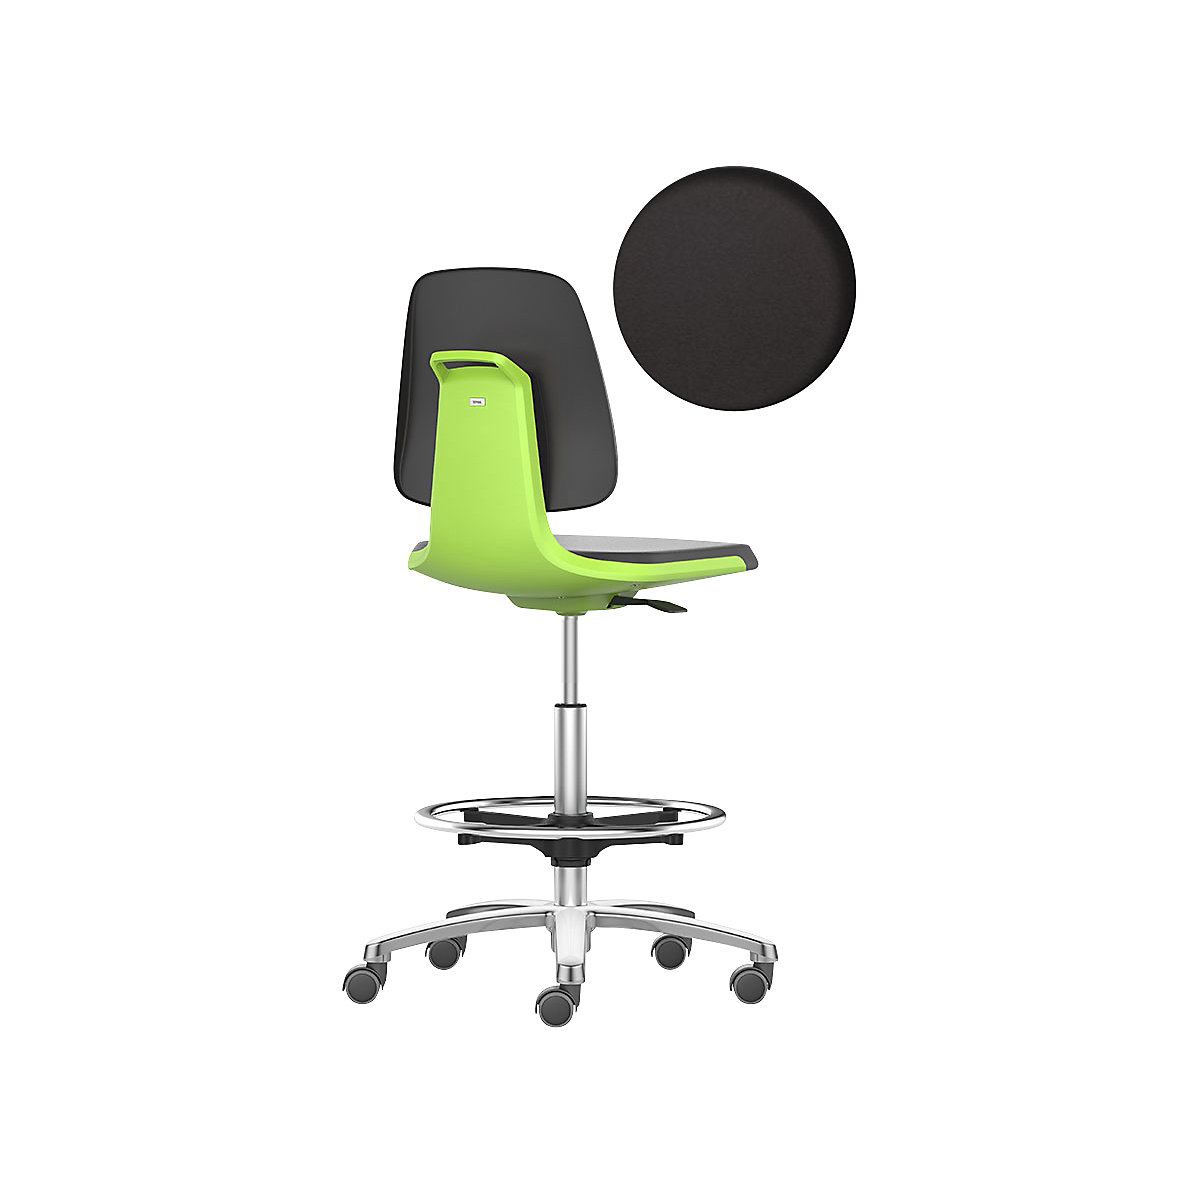 LABSIT industrial swivel chair – bimos, high chair with sit-stop castors and foot ring, vinyl upholstered seat, green-10